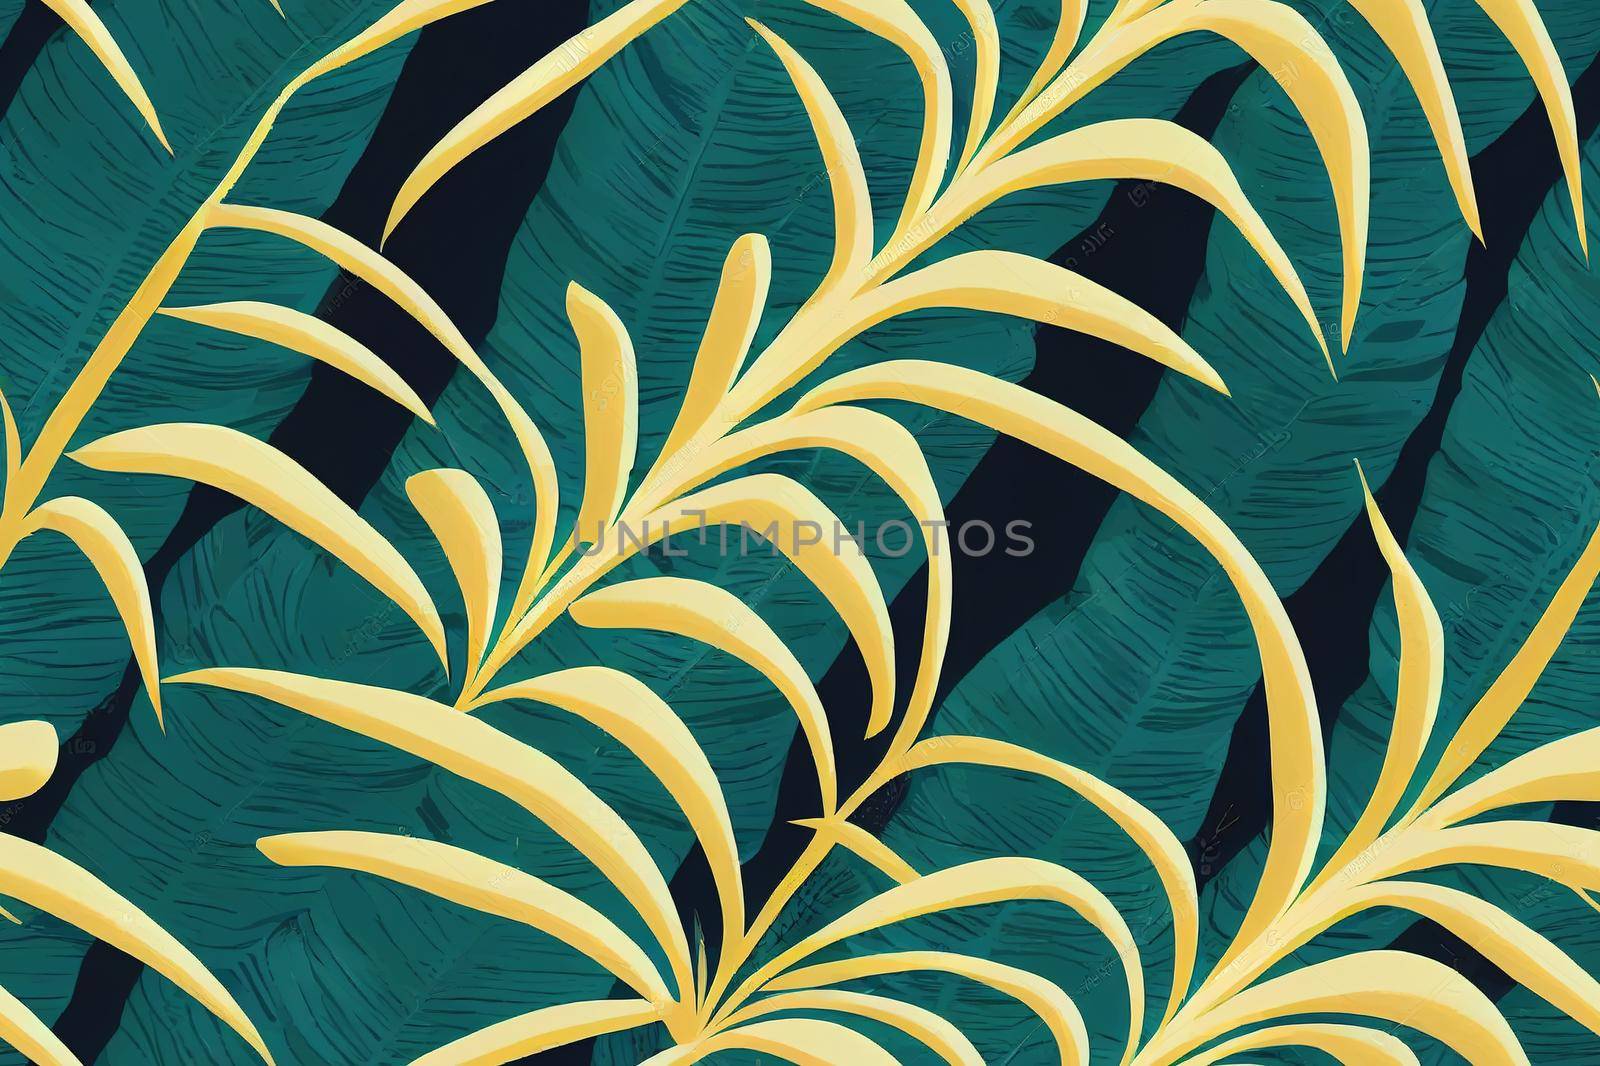 Tropical pattern, palm leaves seamless floral background. Exotic plant on pastel stripes print illustration. Summer nature jungle print. Leaves of palm tree on paint lines. ink brush strokes